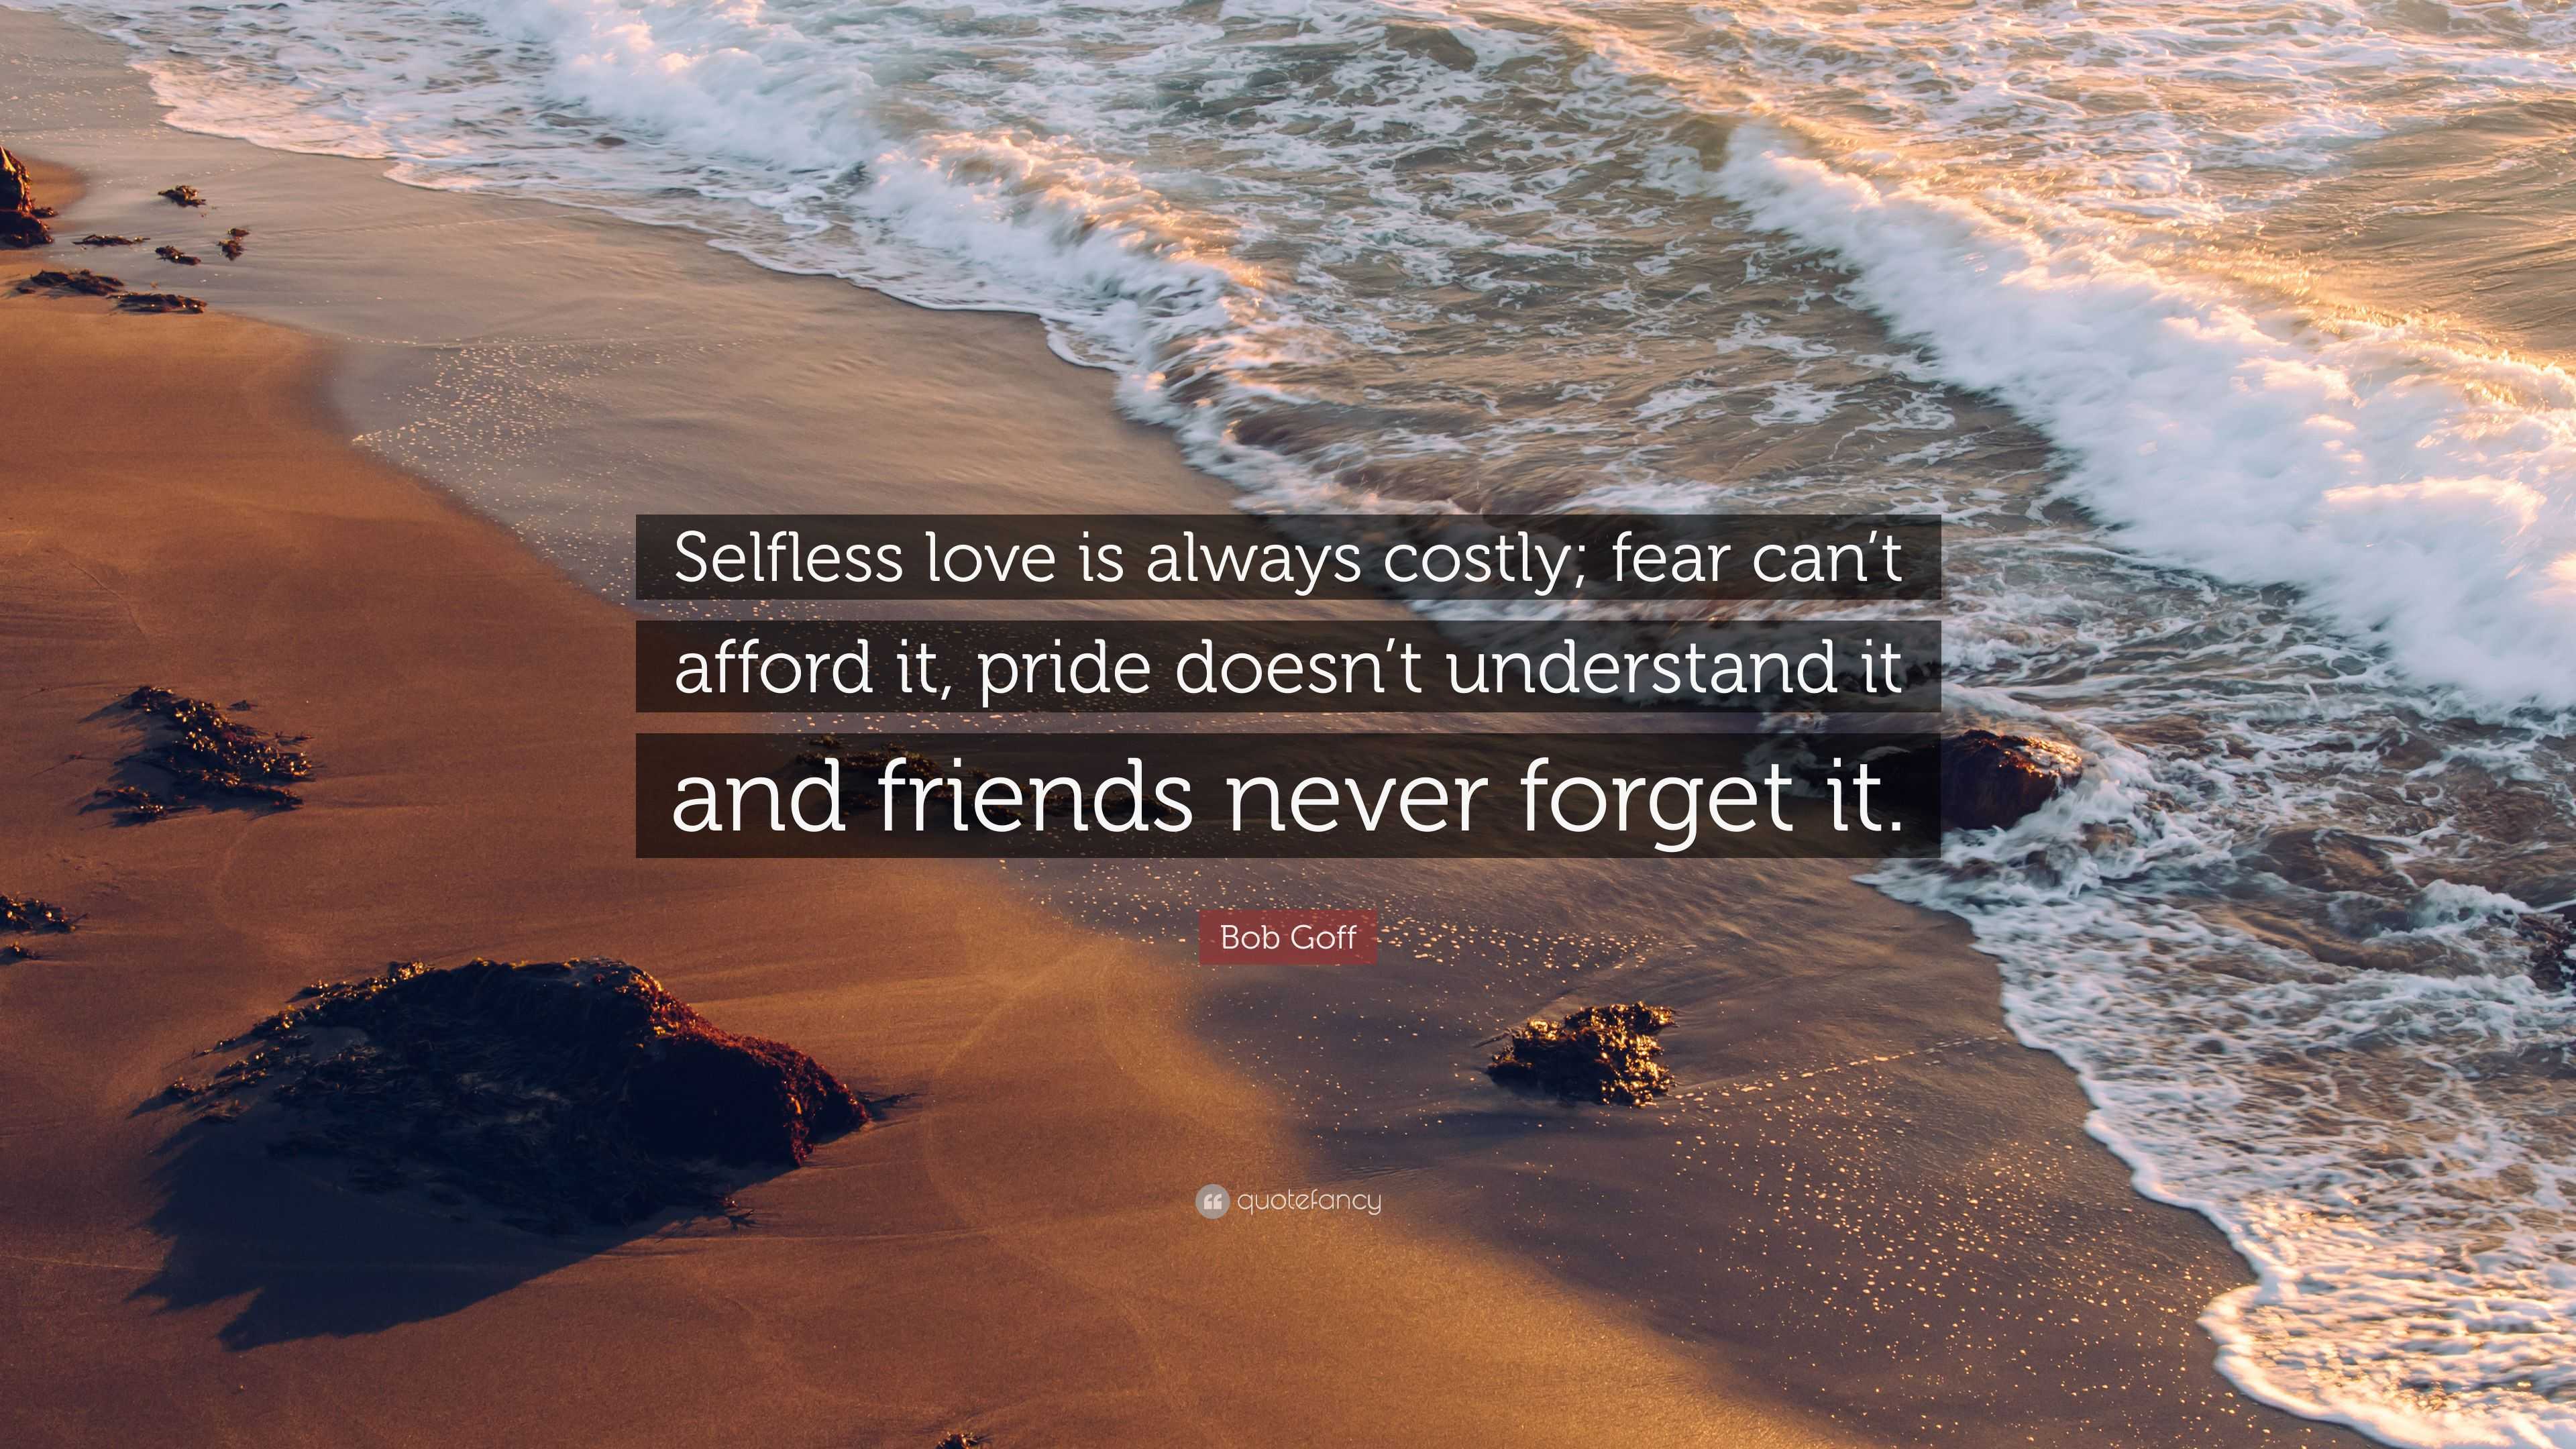 Bob Goff Quote: “Selfless love is always costly; fear can't afford